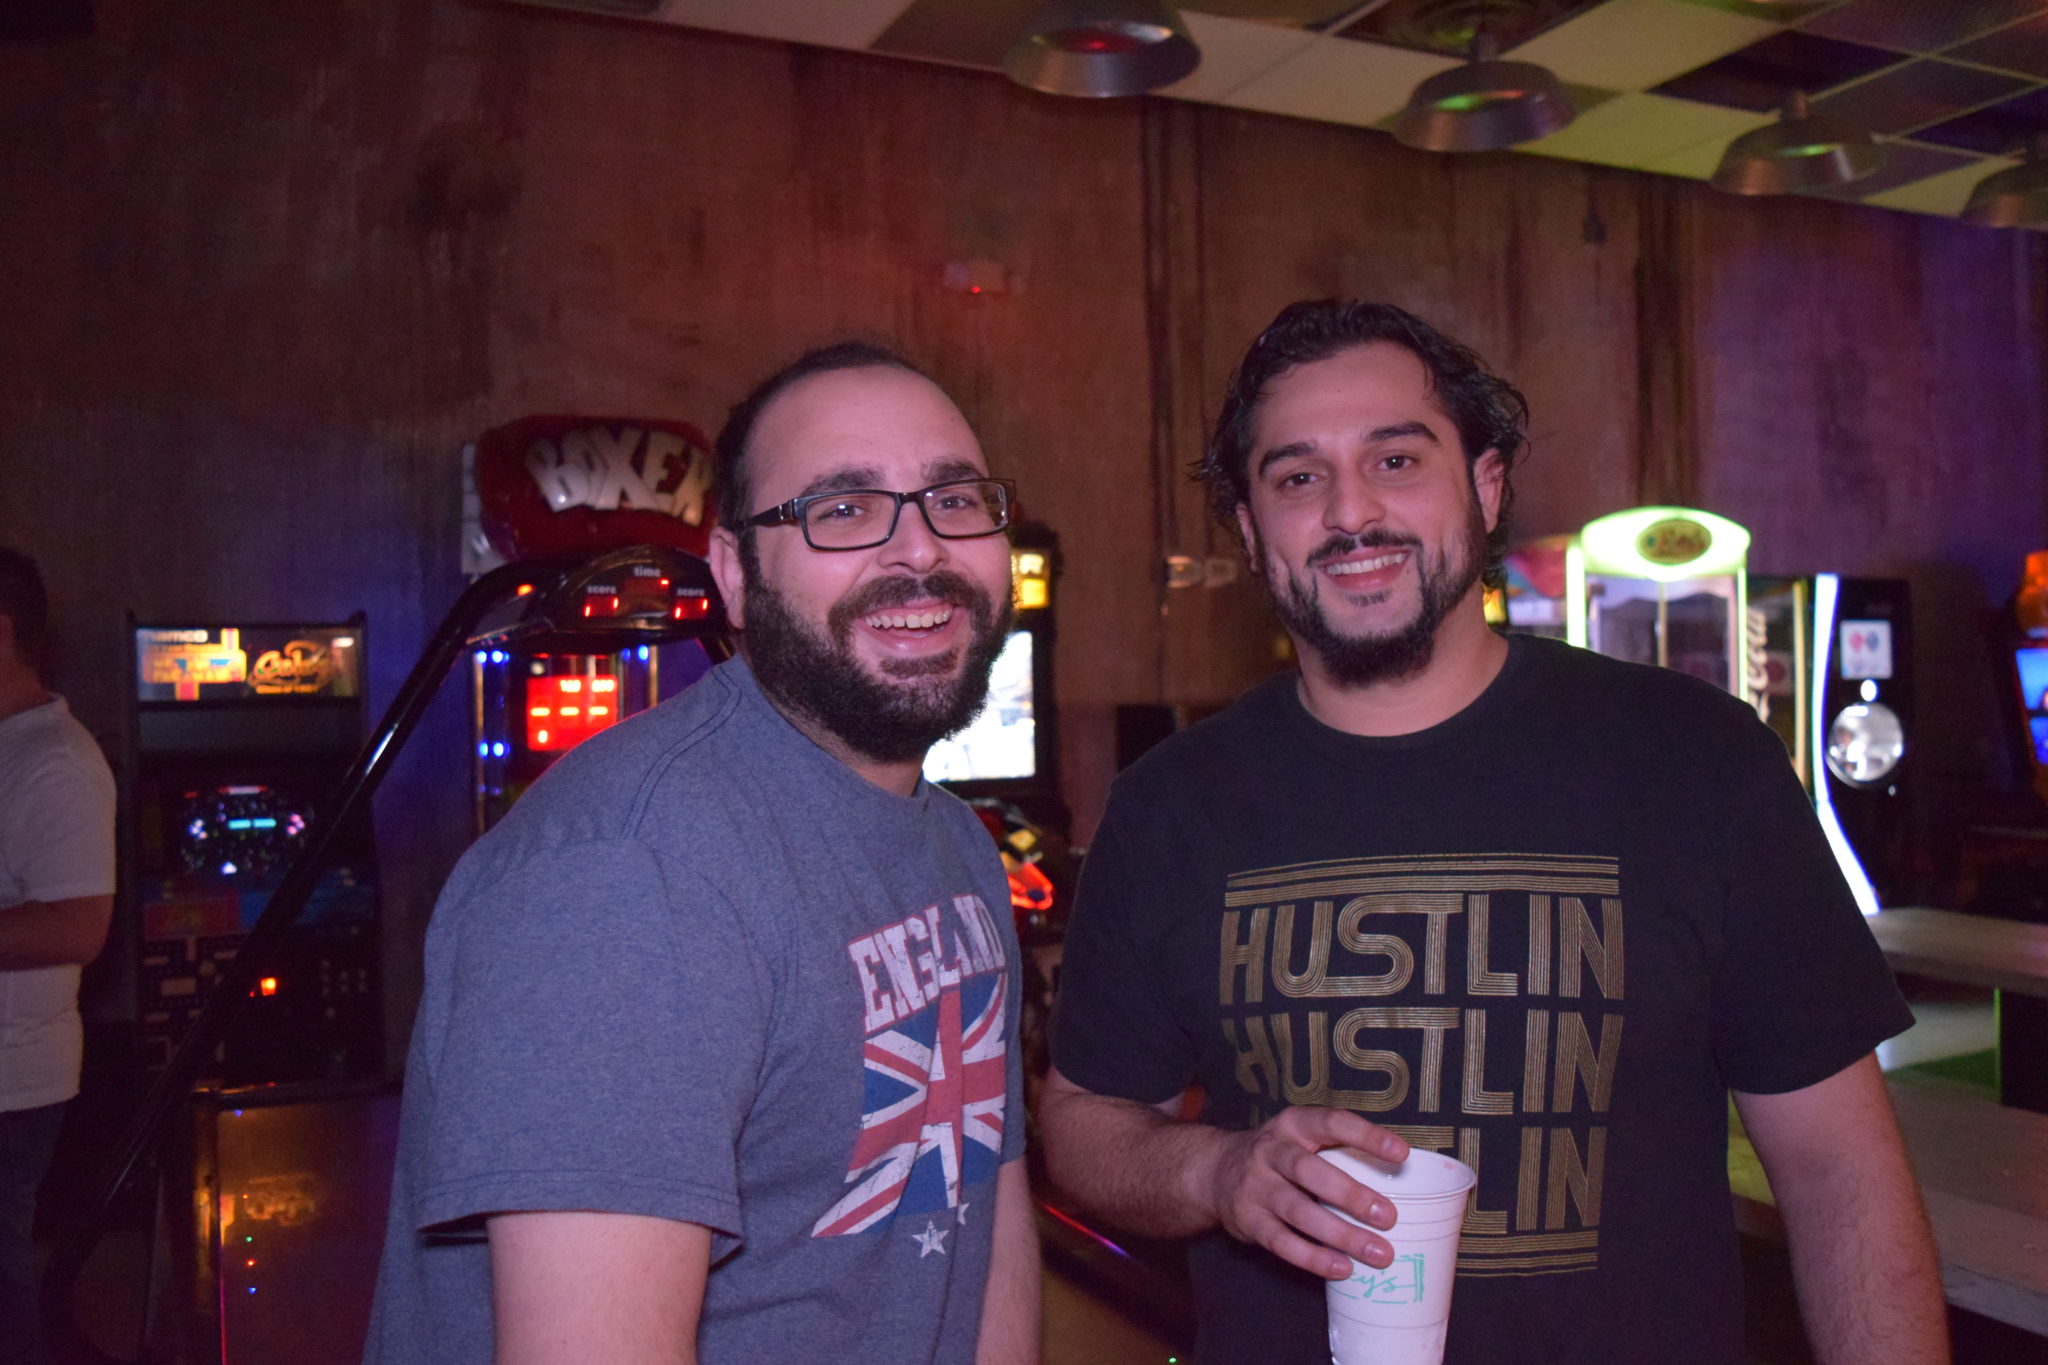 Comedians share a smile by the arcades